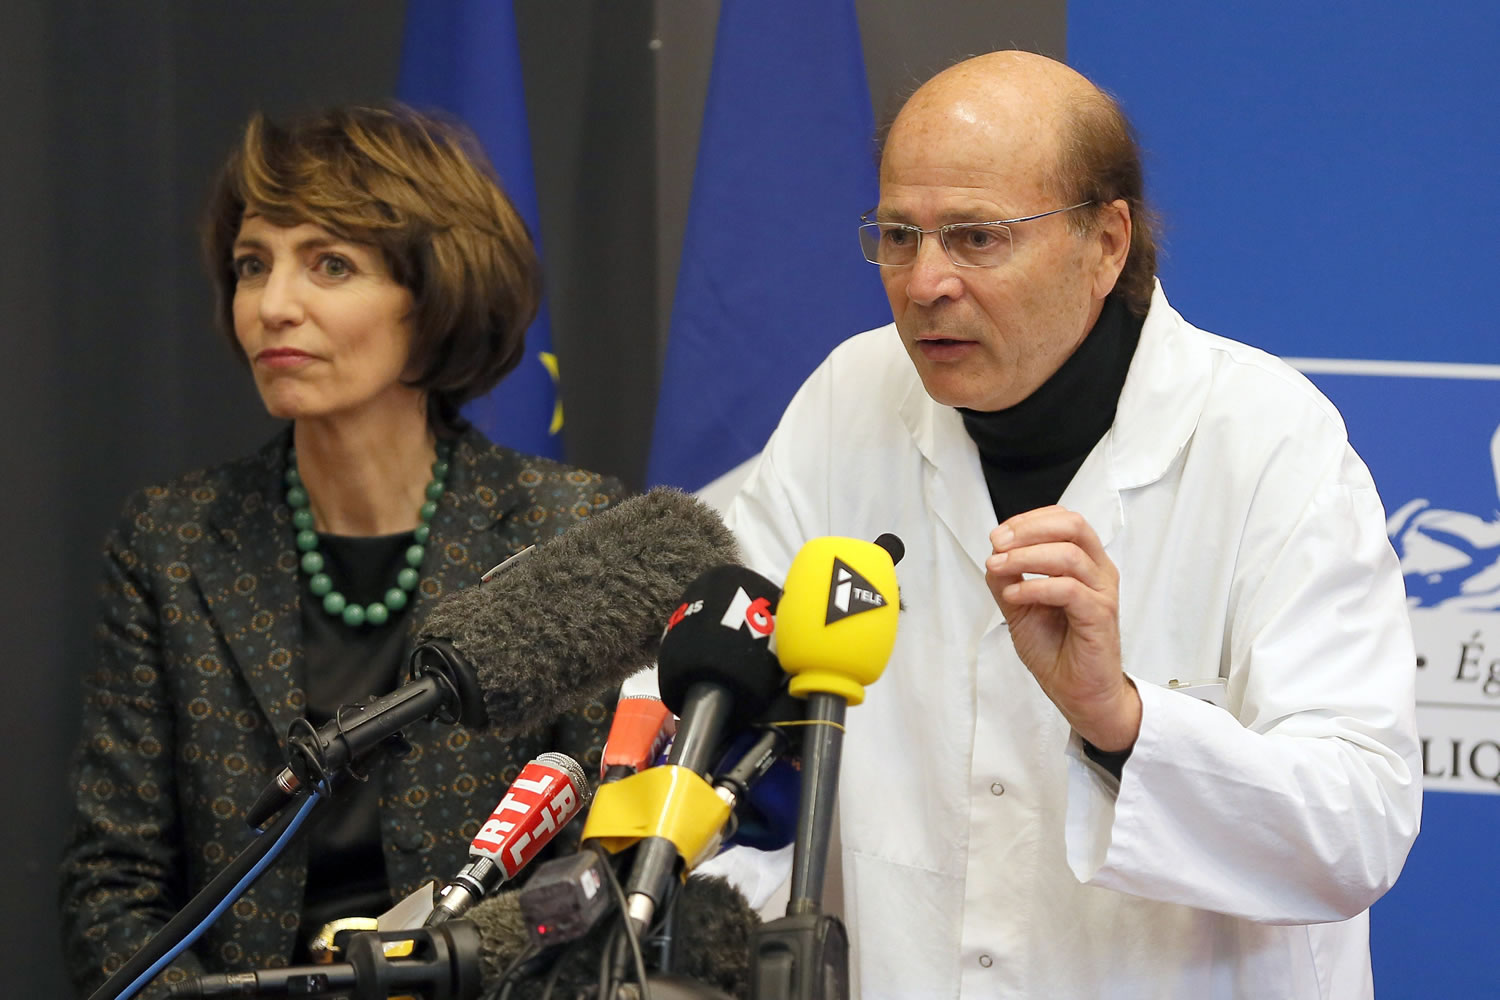 French Health Minister Marisol Touraine, left, and Professor Gilles Edan, the chief neuroscientist at Rennes Hospital, address the media during a Friday press conference in Rennes, western France. Six previously healthy medical volunteers have been hospitalized -- including one man who is now brain dead -- after taking part in a botched drug test at the Biotrial lab in western France, the French Health Ministry said Friday.